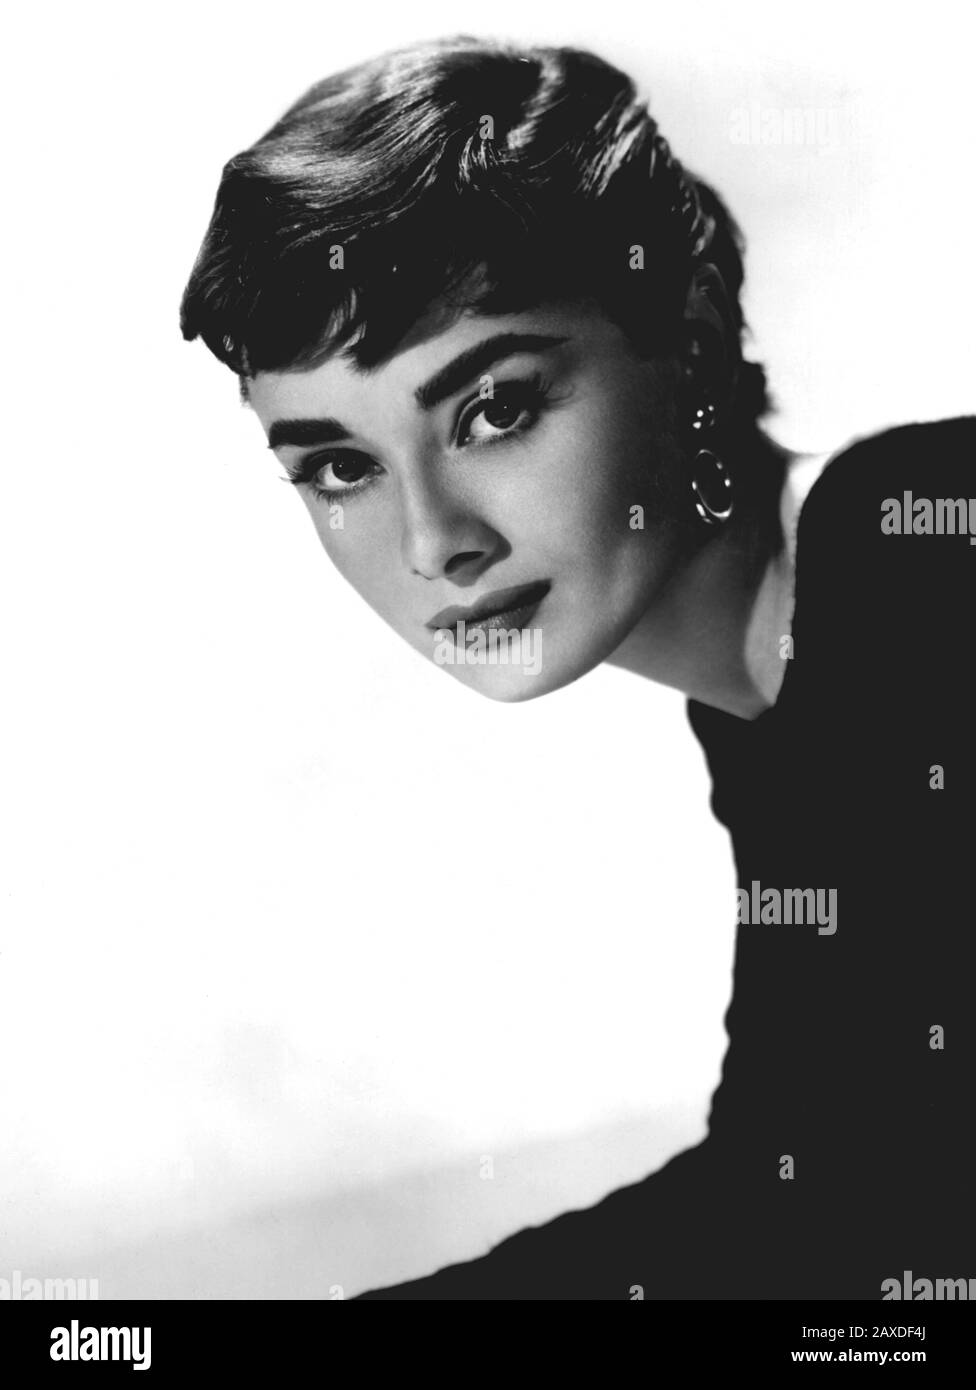 1954 :The movie actress AUDREY HEPBURN in SABRINA by Billy Wilder - COMEDY - gioiello - gioielli - jewel - jewellery - jewels - orecchino - orecchini - eardrops  - earrings -  - DIVA - DIVINA - NOT FOR PUBBLICITY USE - NOT FOR ADVERTISING USE - NOT FOR GADGETS USE - NON PER USO PUBBLICITARIO - NON PER GADGETS----  Archivio GBB Stock Photo